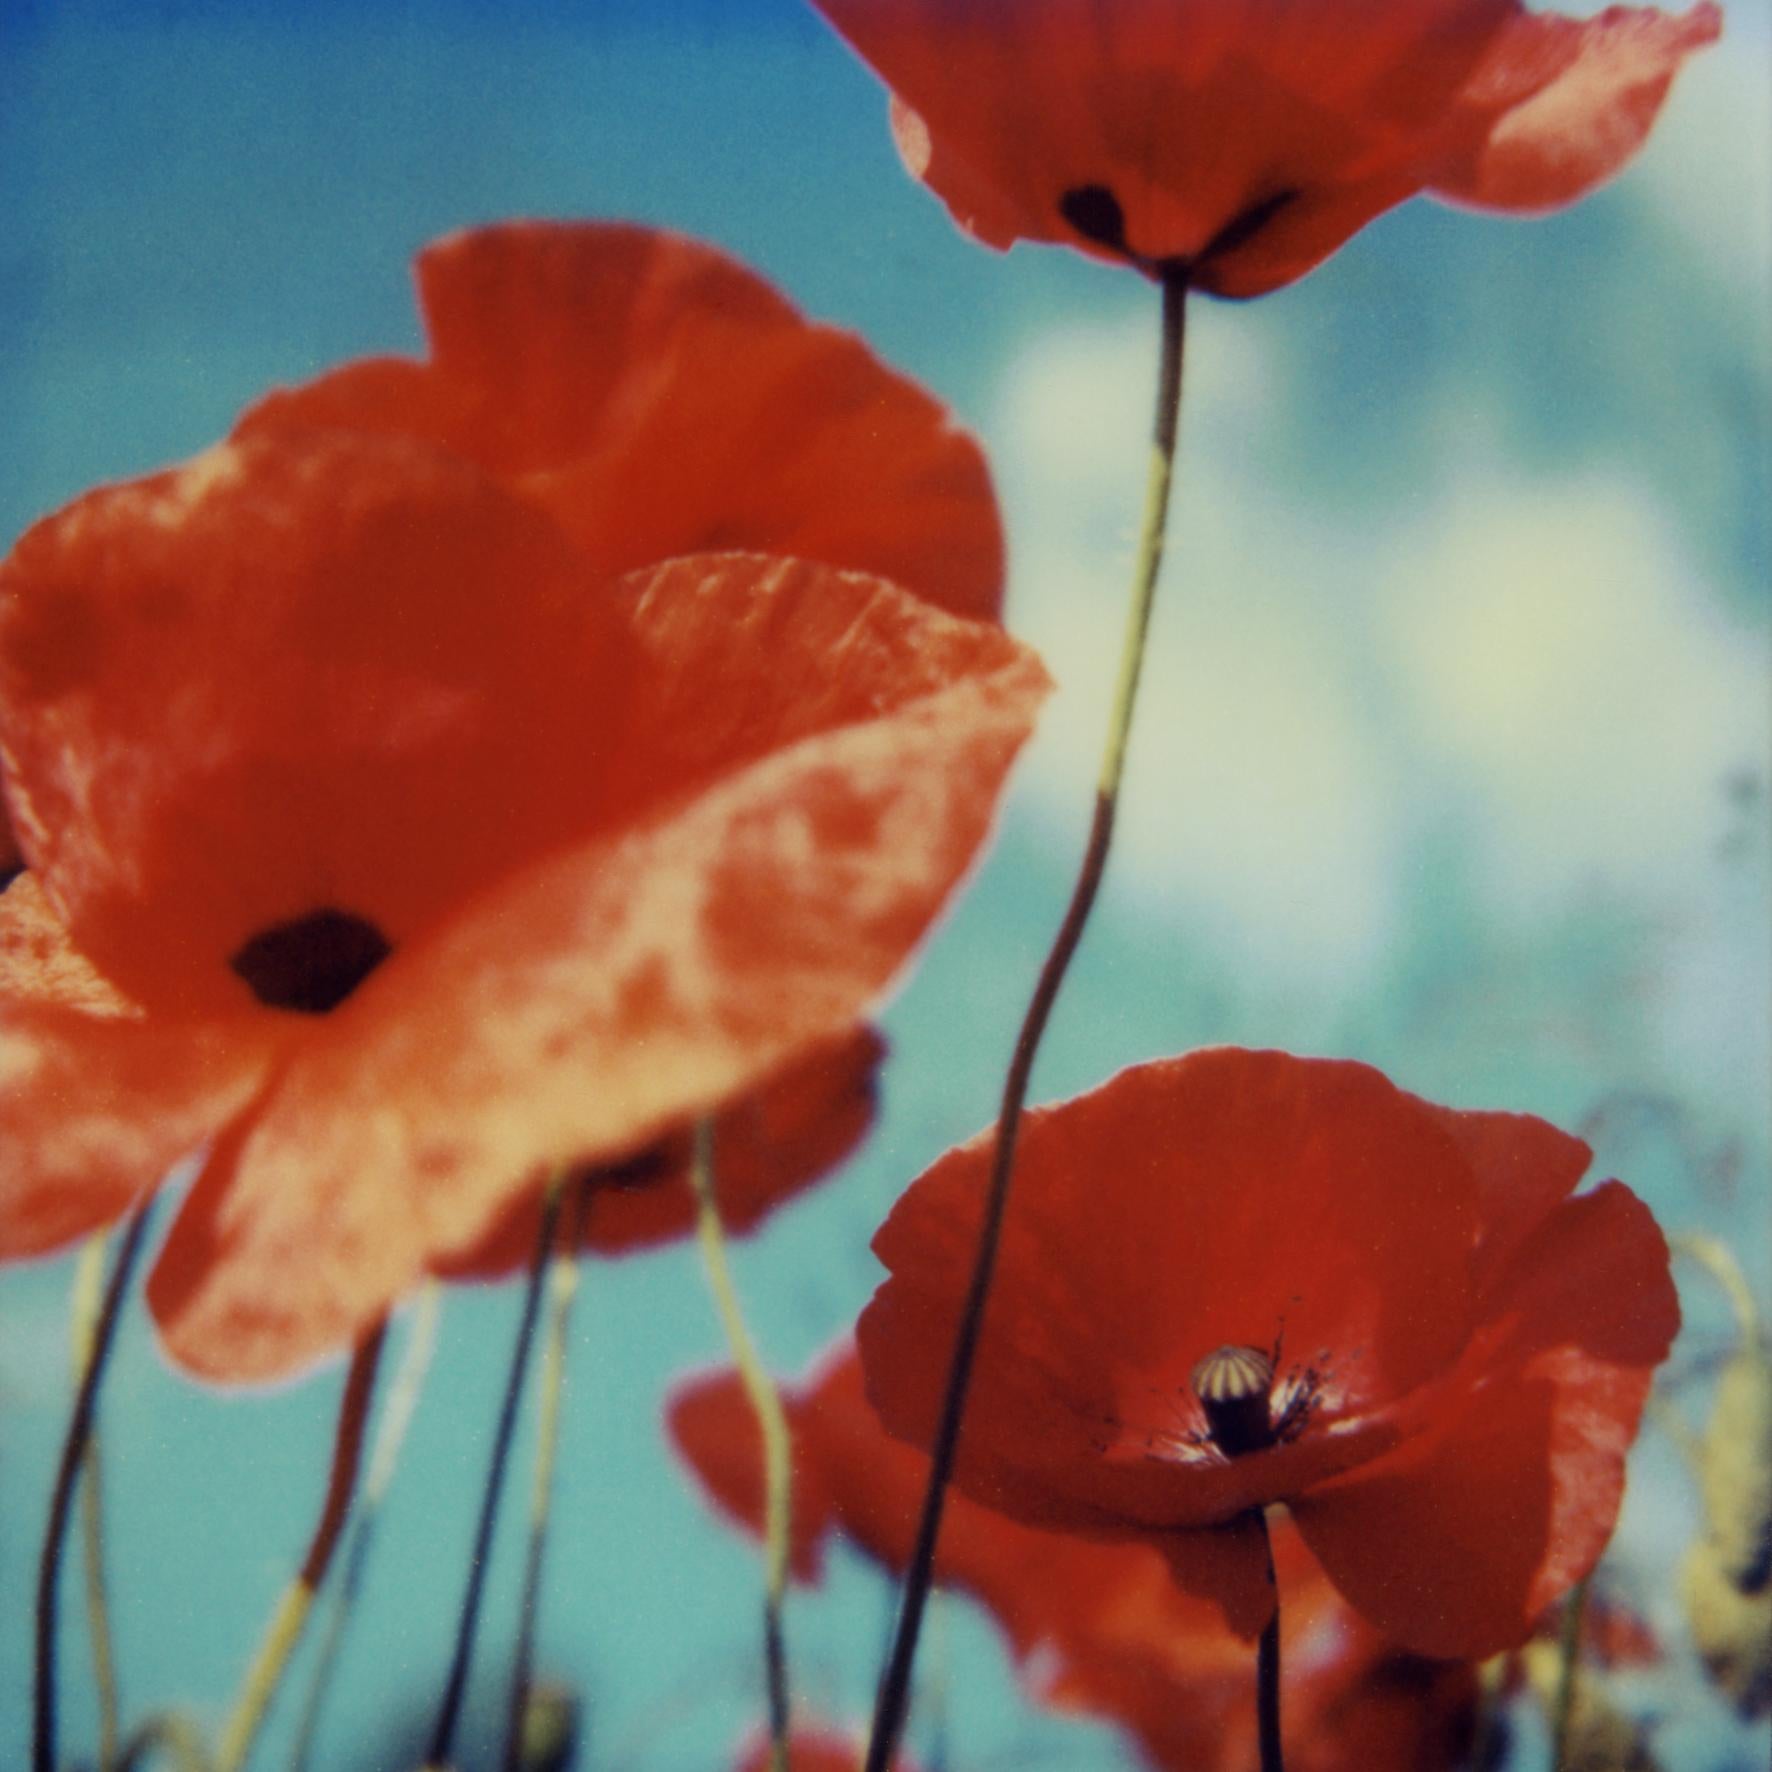 Poppy Realm #ROW [From the series Wild Things] - Photograph by Carmen de Vos